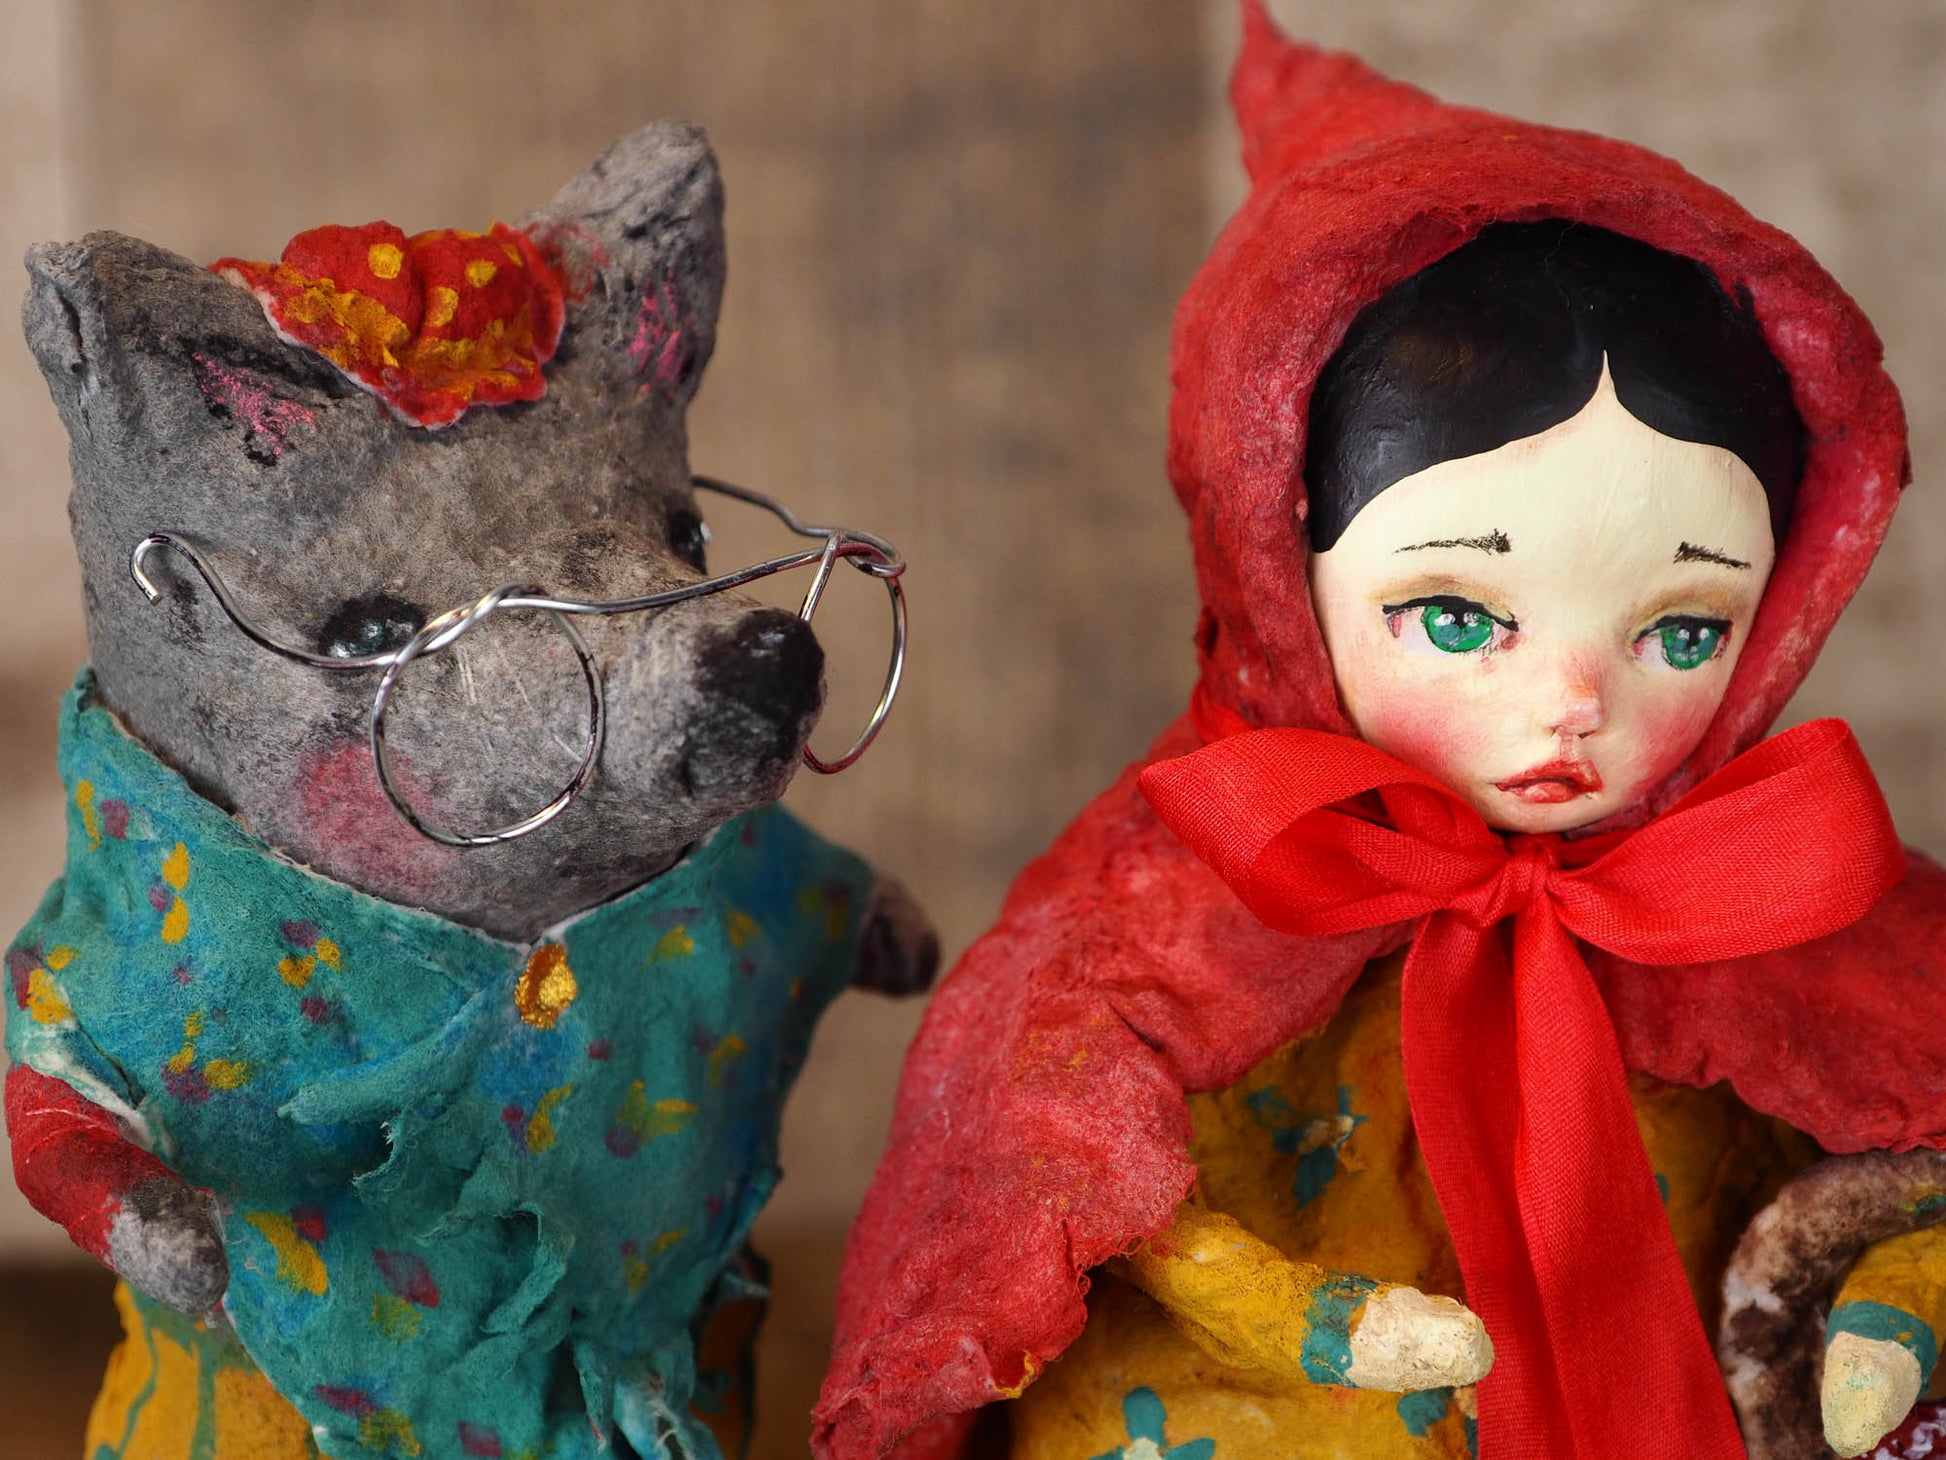 LITTLE RED RIDING HOOD AND THE BIG BAD WOLF - Original sculpted paper clay art doll by Danita, Art Doll by Danita Art